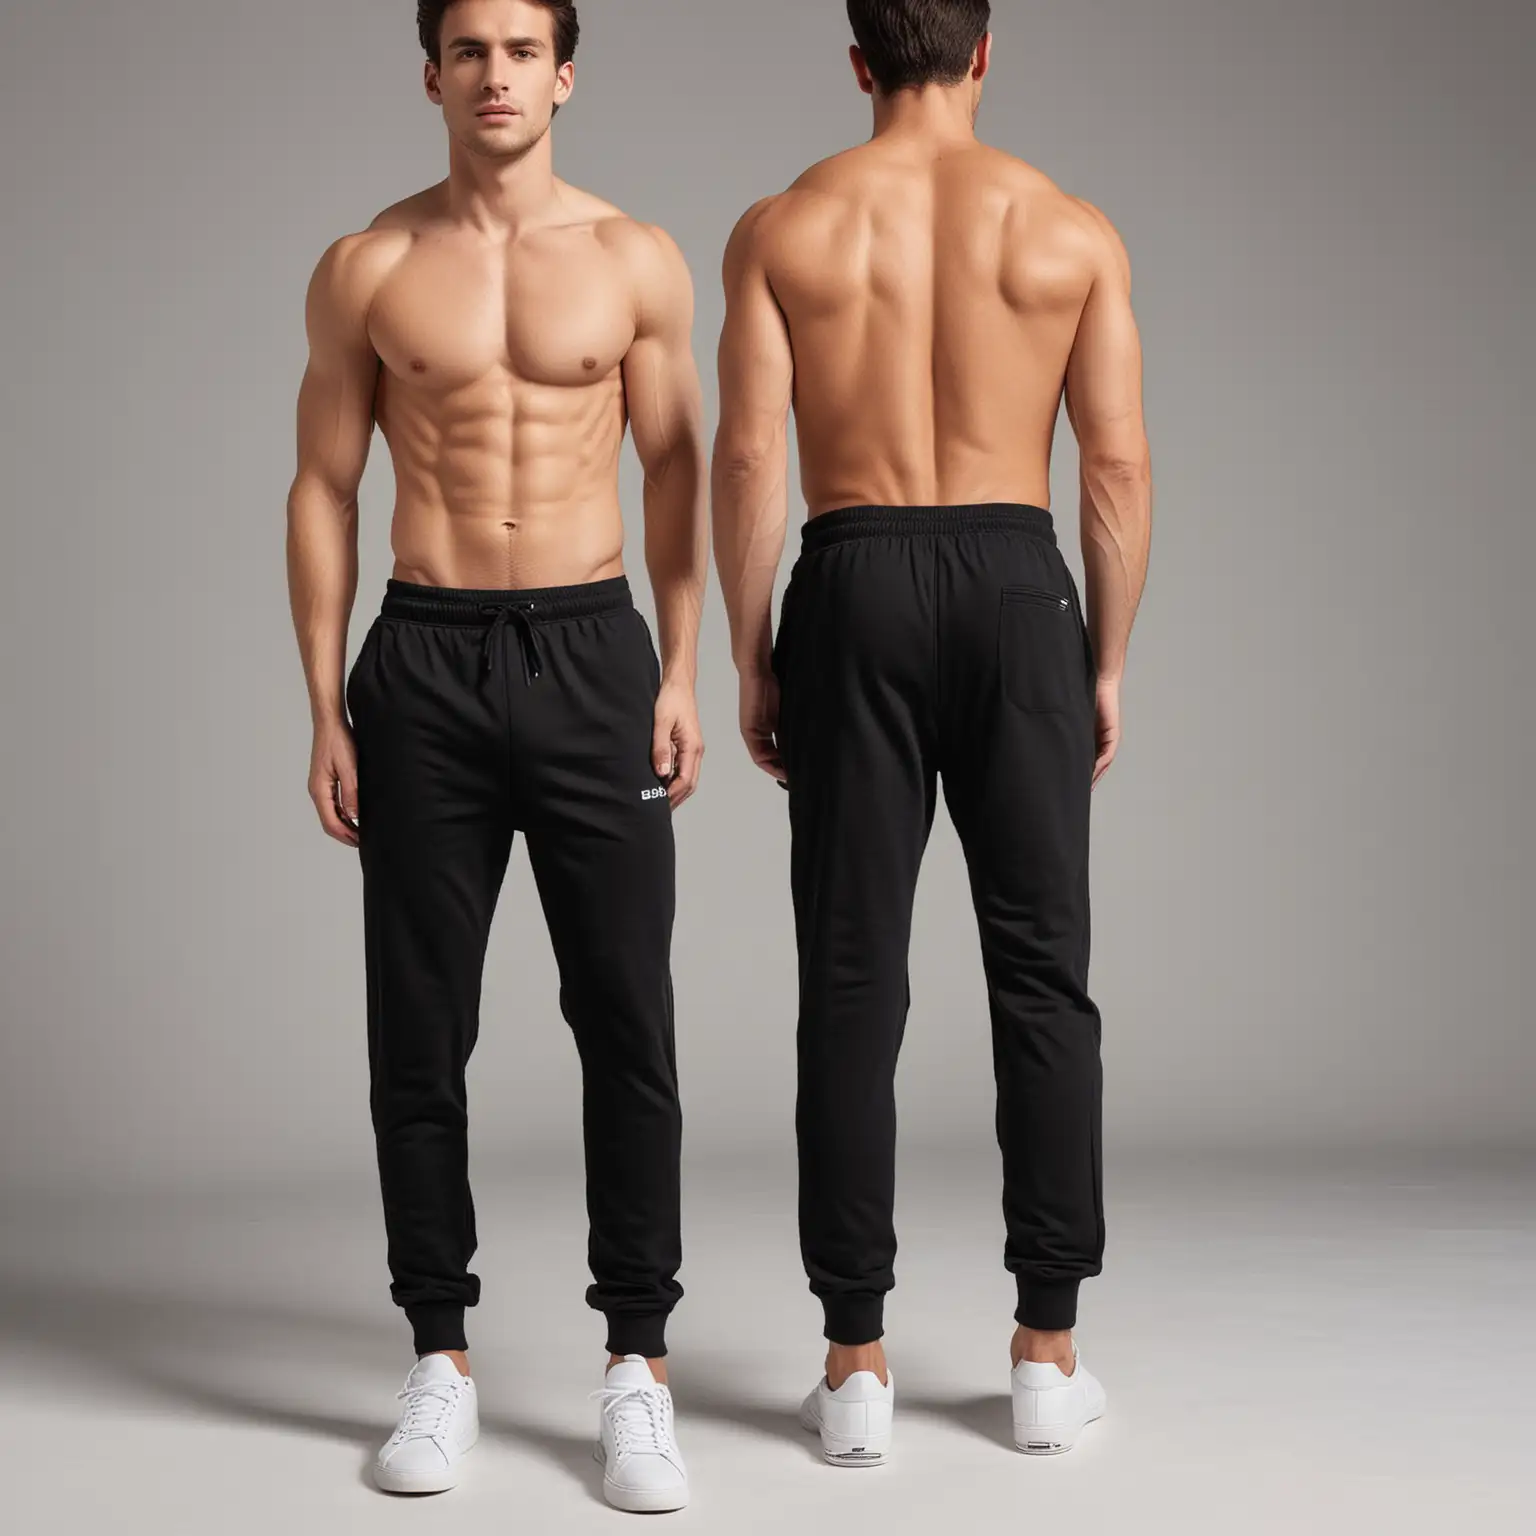 generate iamges of man wearing balck cotton track pants for gym 
from 4 differnrt angles